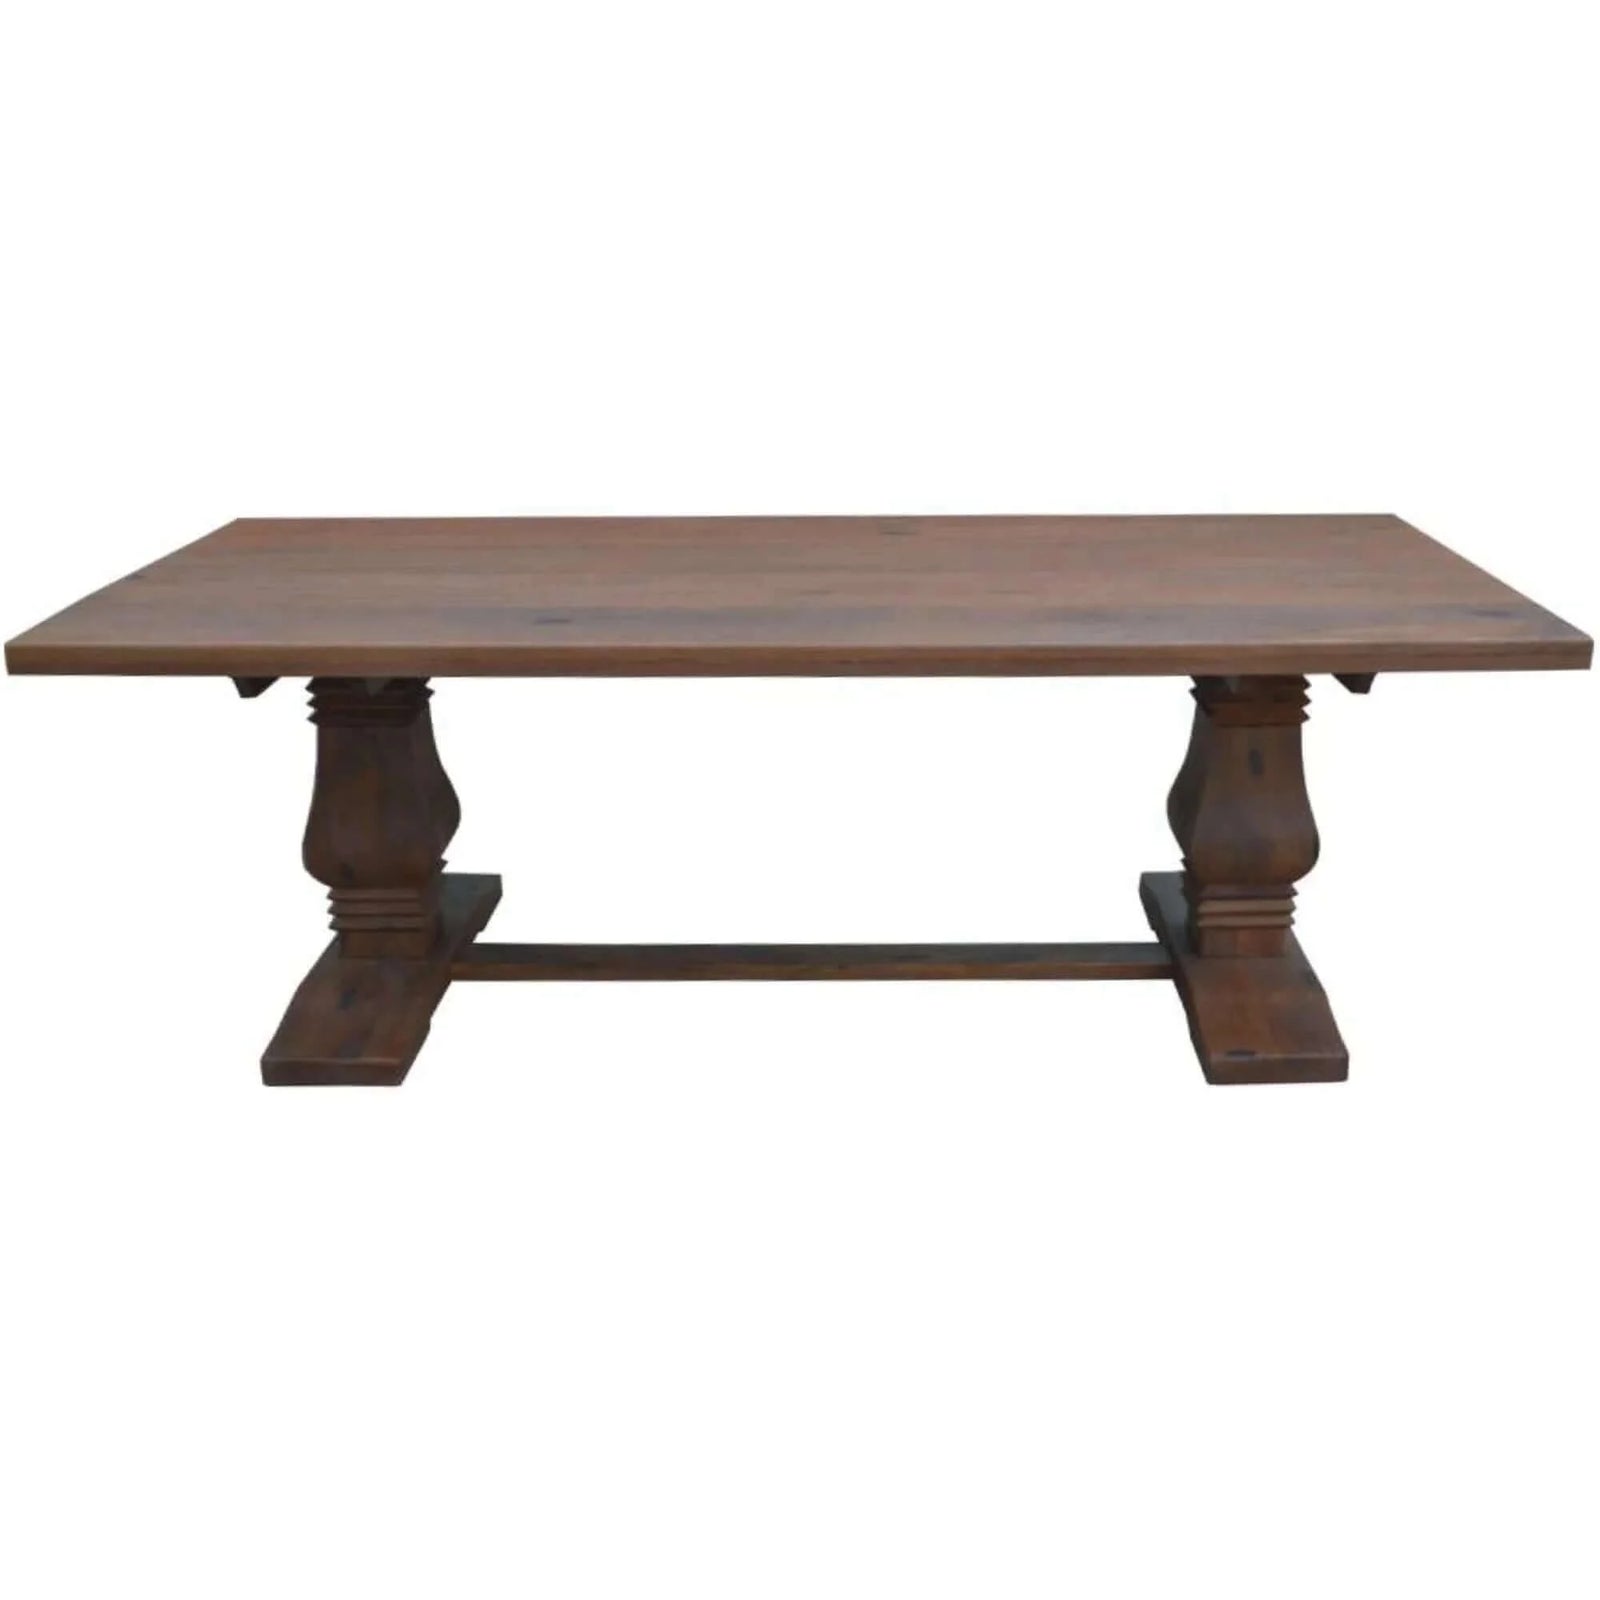 French Provincial Florence Dining Table 230cm-Upinteriors